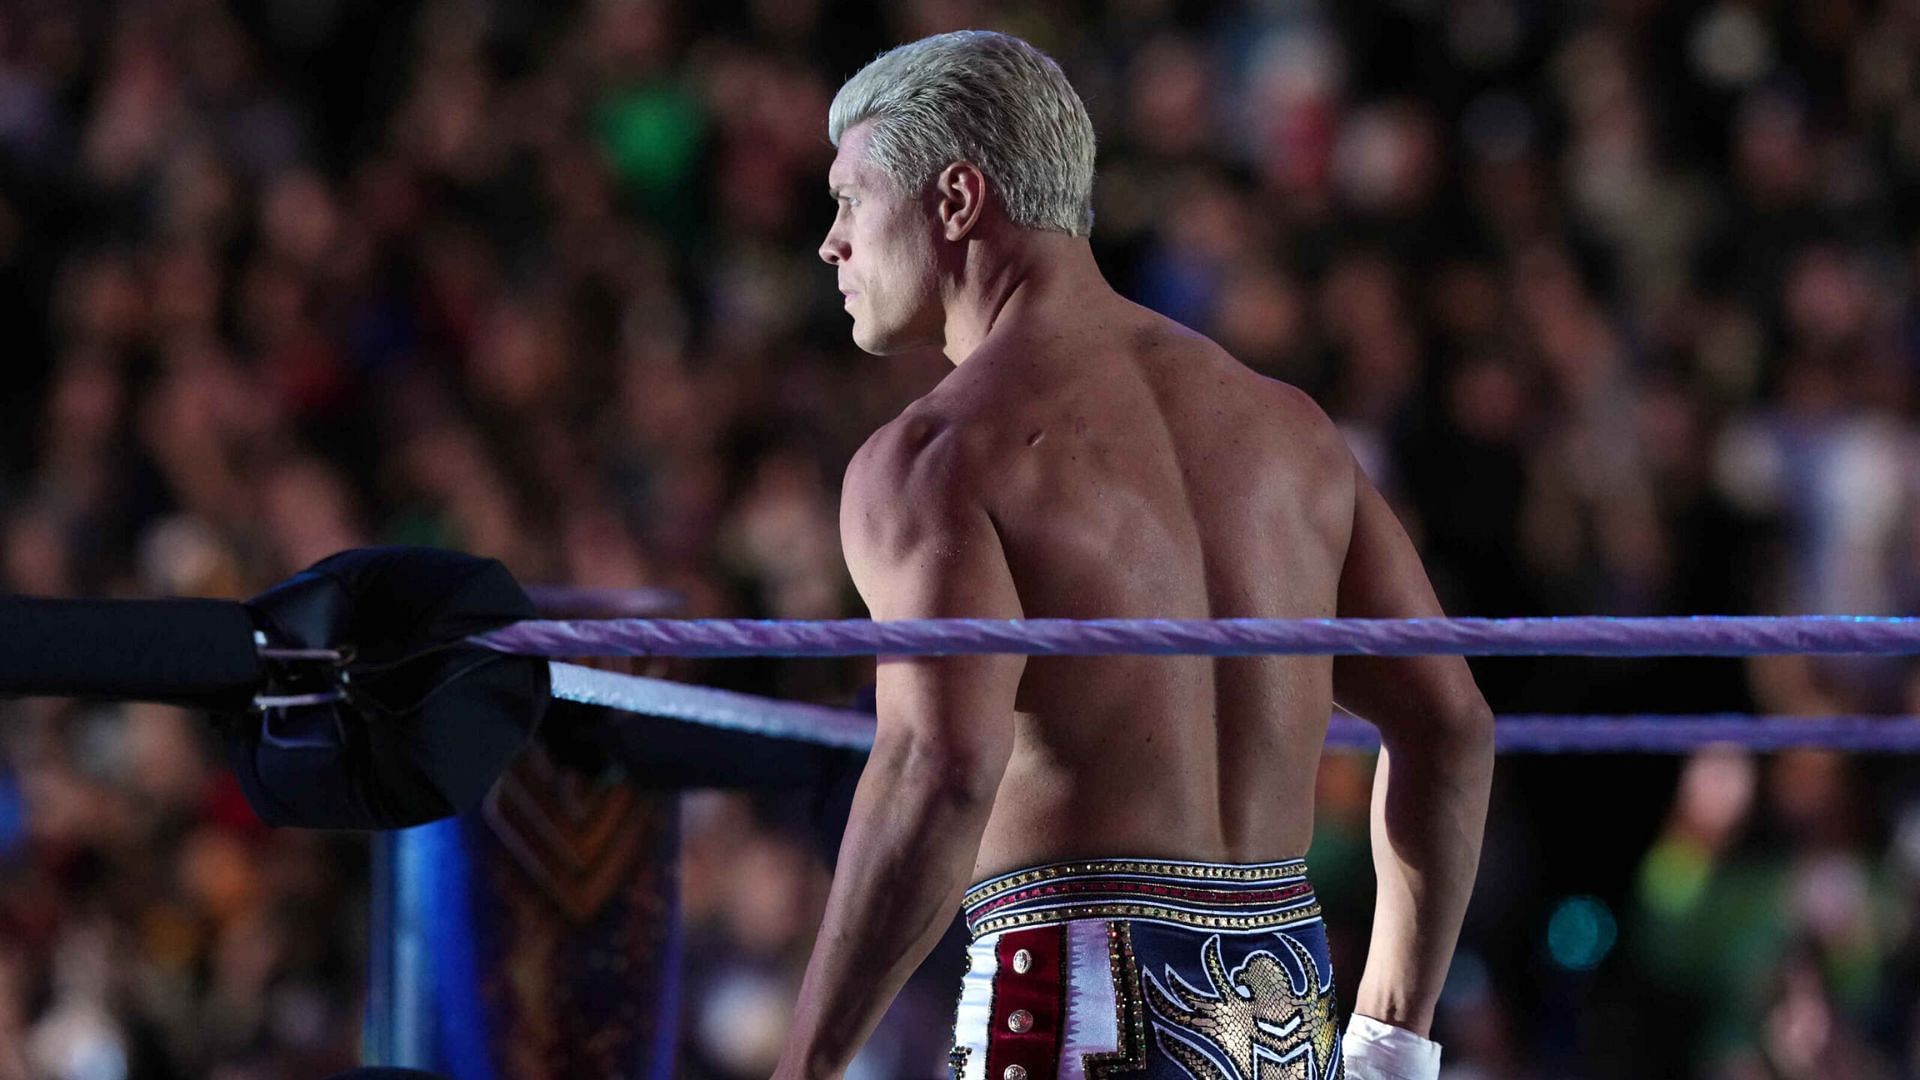 Cody Rhodes is currently a WWE superstar